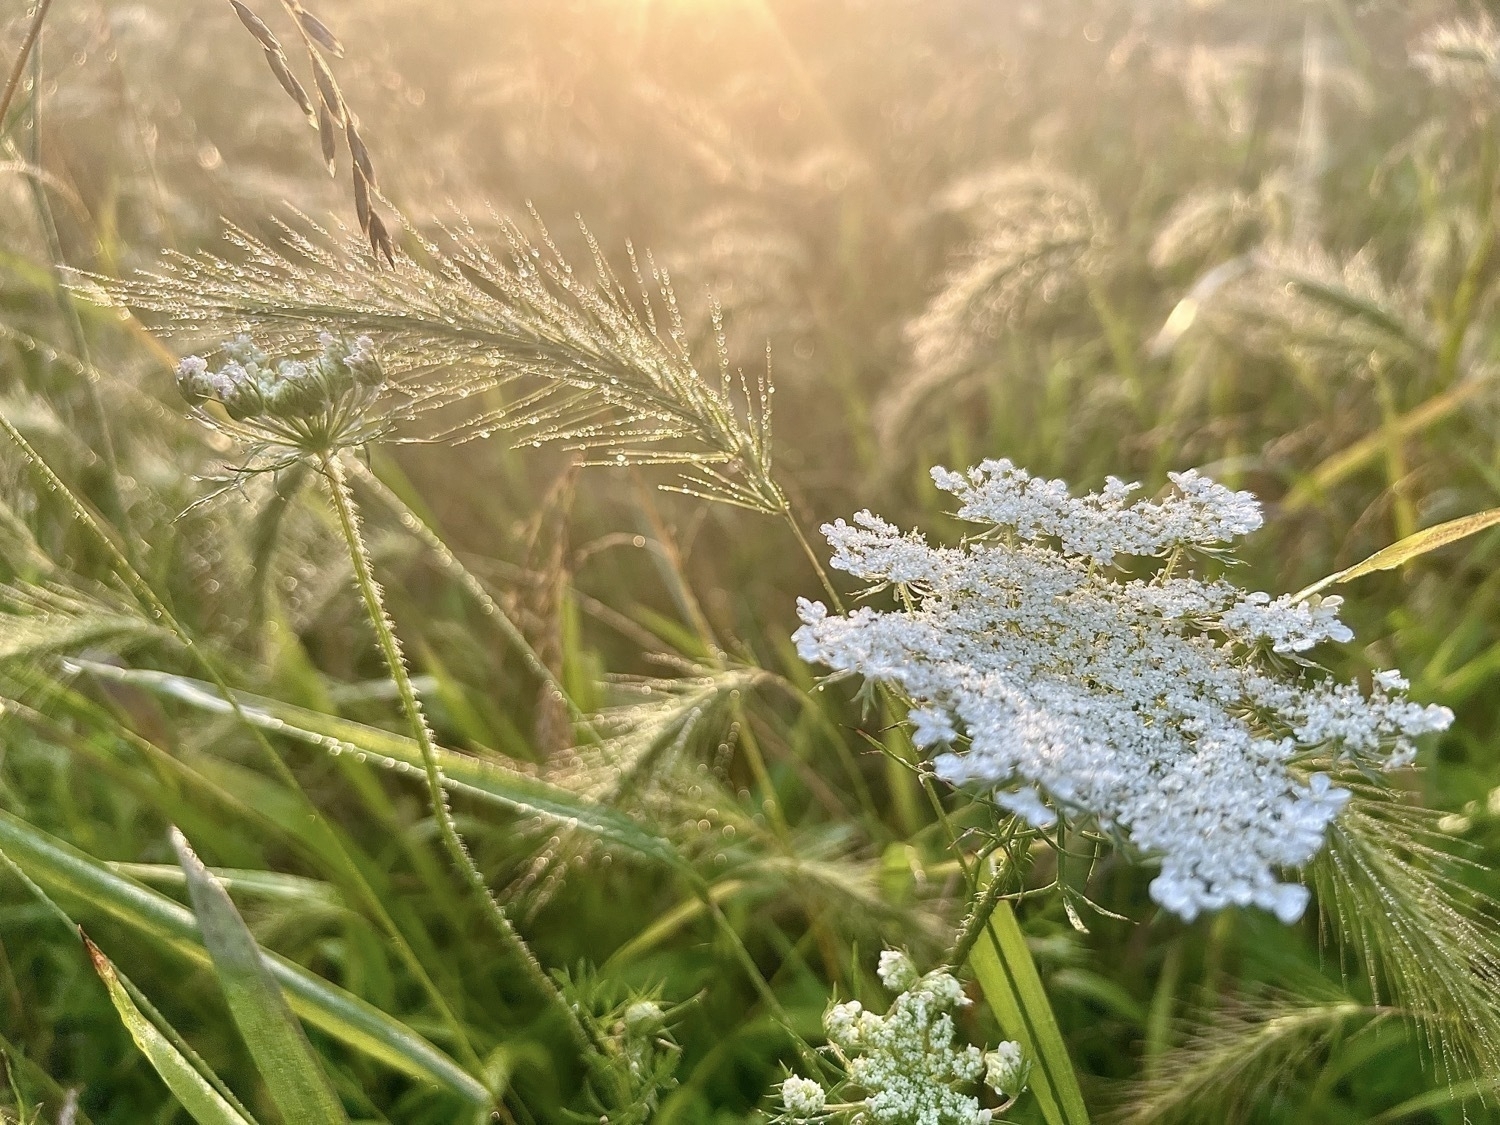 The gold light of the morning sun lights the top half of a close view of dew covered grasses. The image becomes more green in the lower half where a cluster of tiny white flowers forms a bowl-shaped flower of Queen Anne's Lace in the mid-right portion of the image.